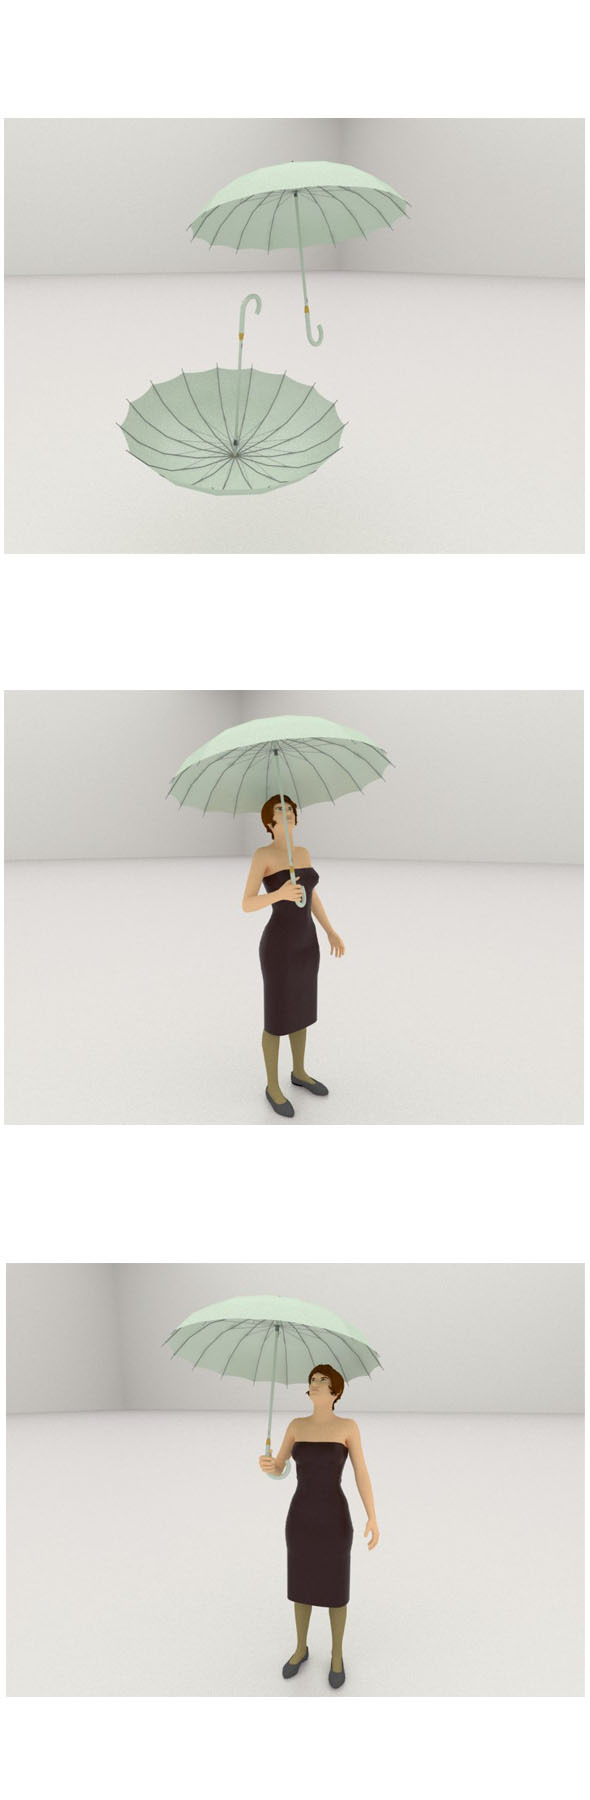 3D woman with - 3Docean 13613417